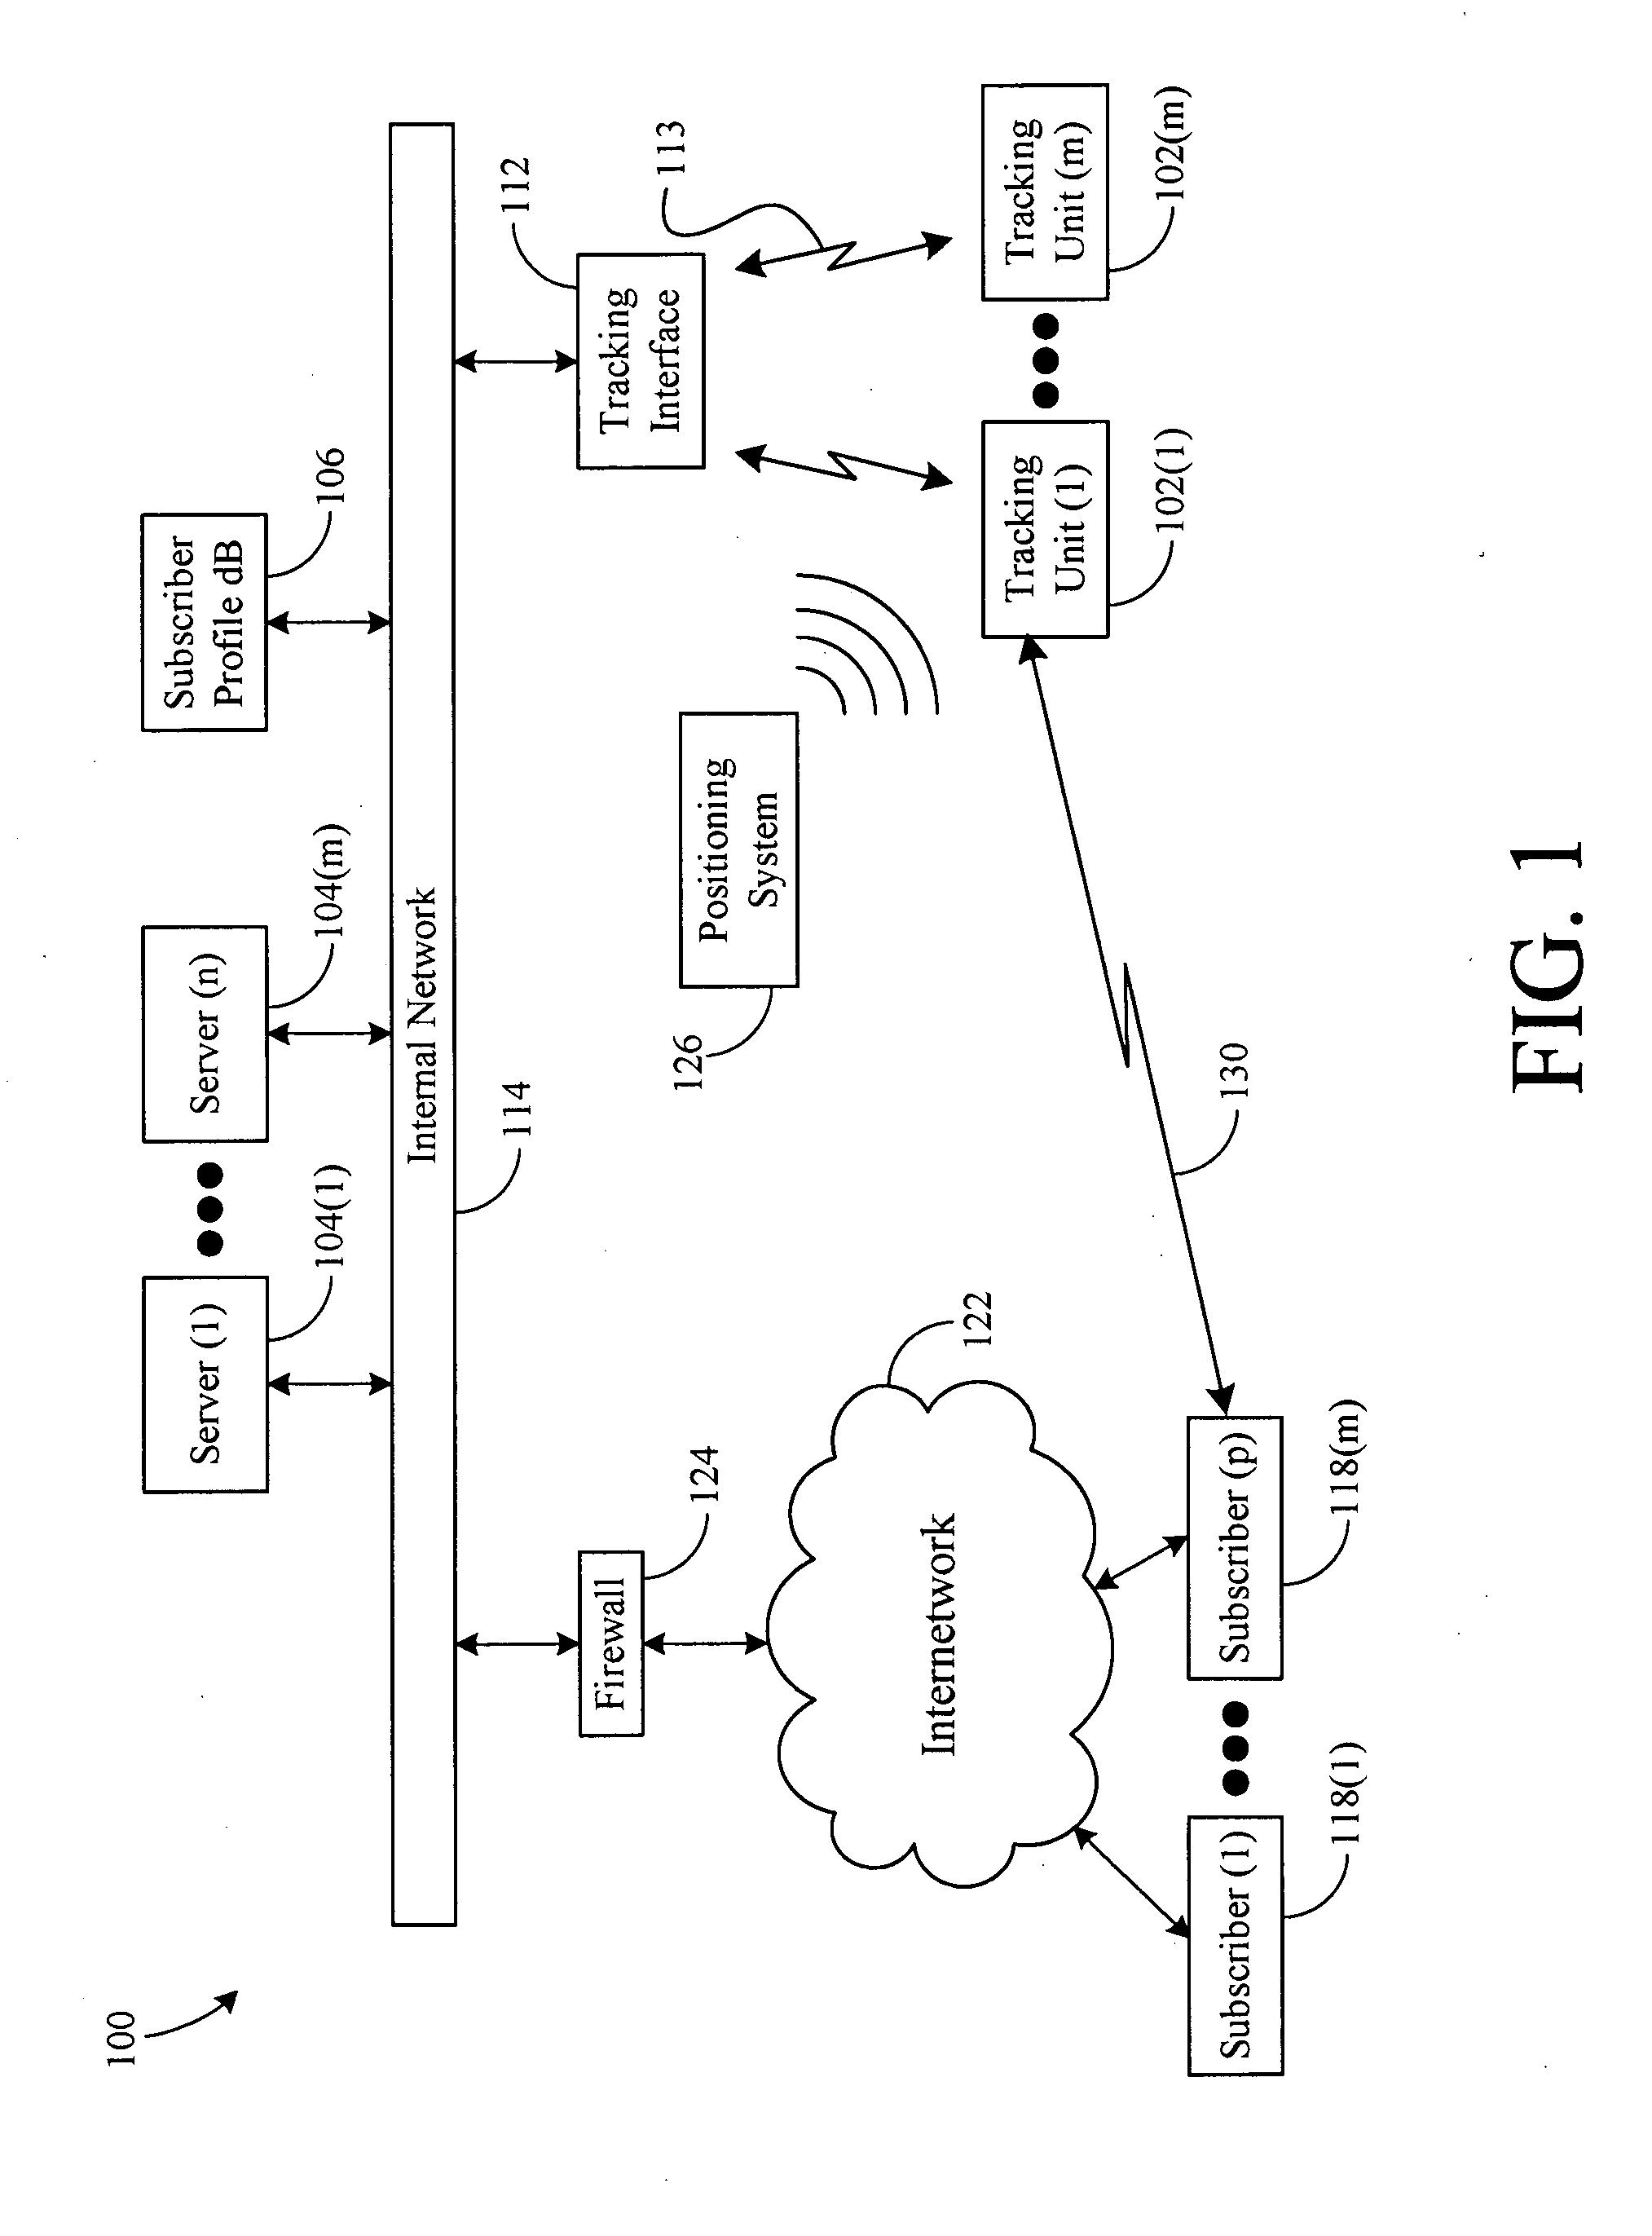 System and method for embedding a tracking device in a footwear insole